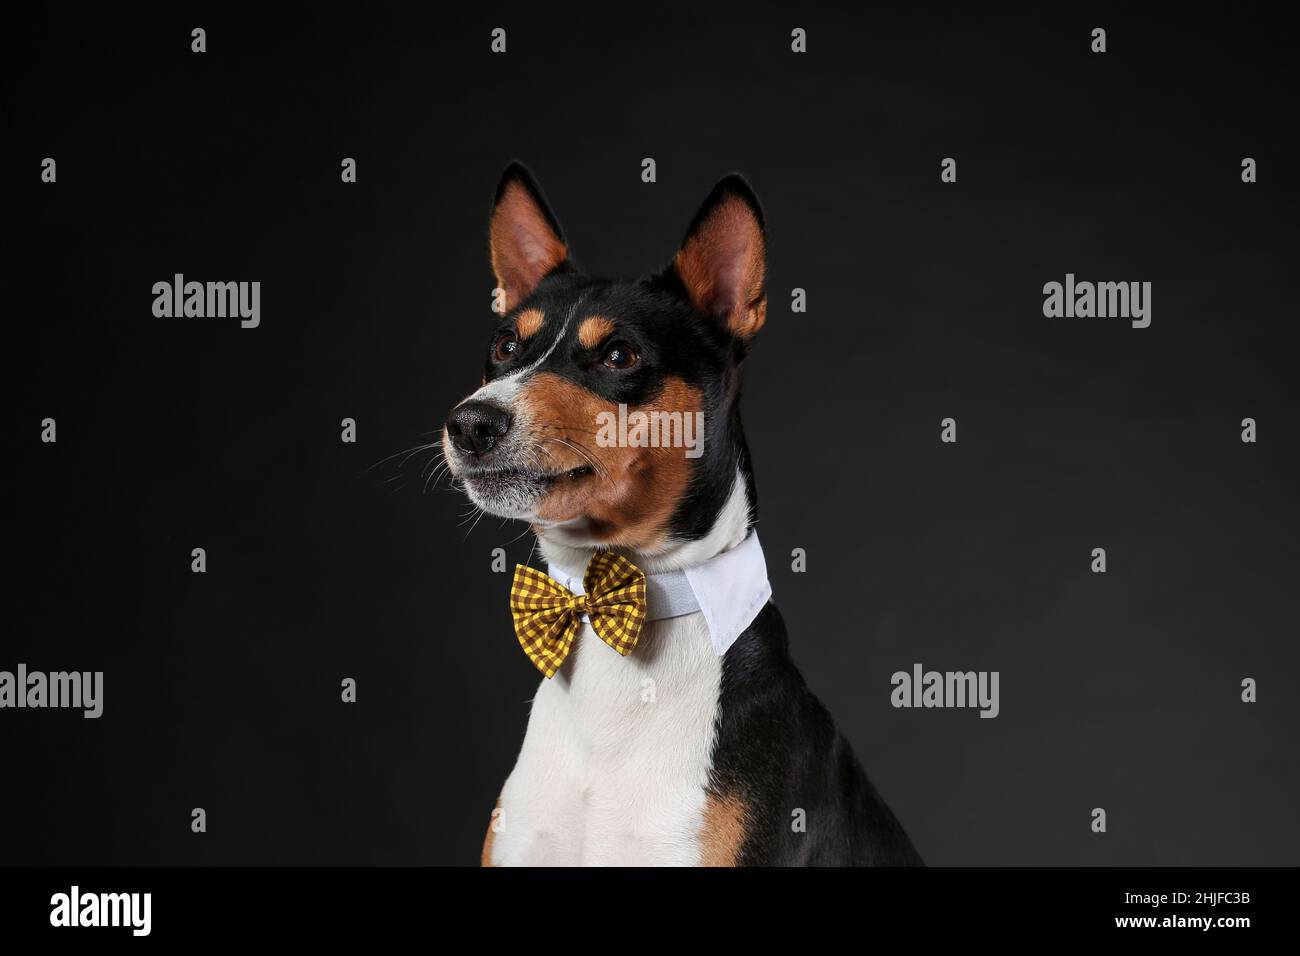 Serious and funny dog of african basenji breed wearing bow tie isolated against black background. Copy space. Stock Photo